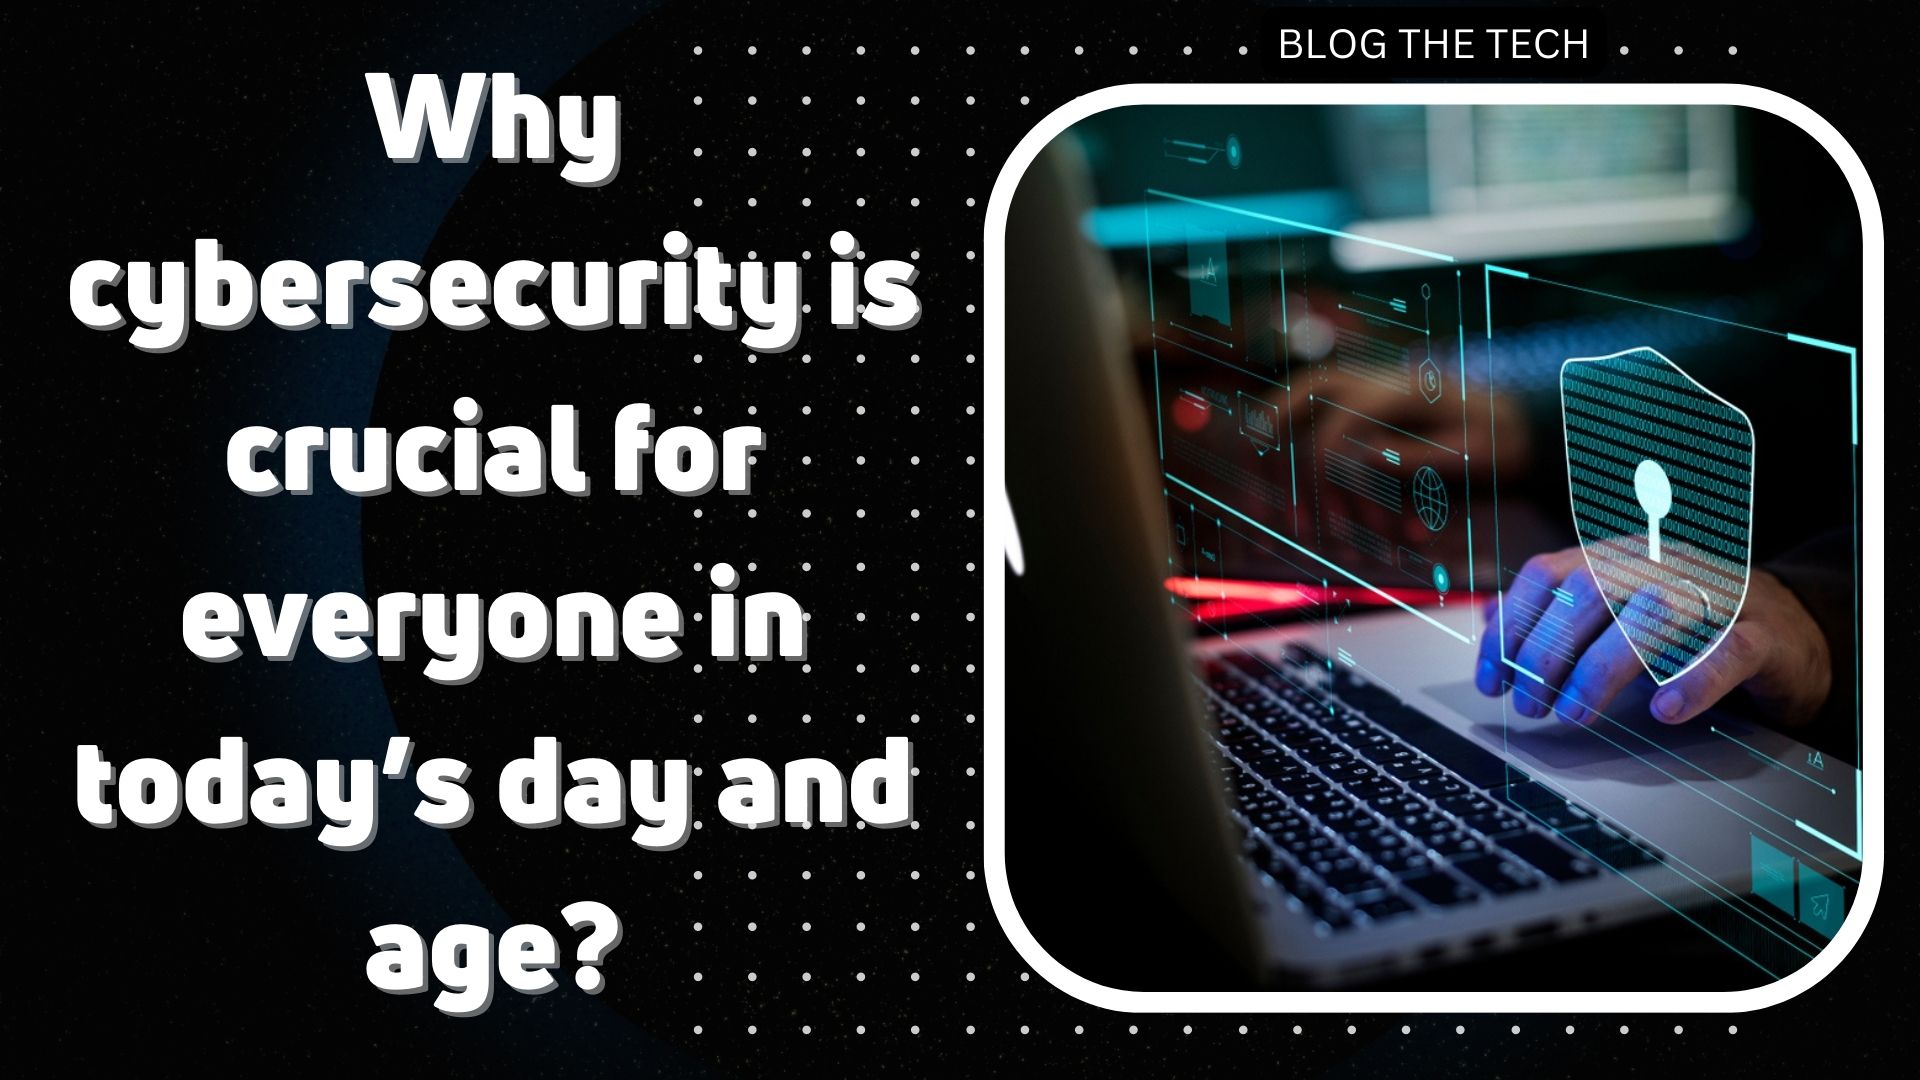 Why cybersecurity is crucial for everyone in today’s day and age?